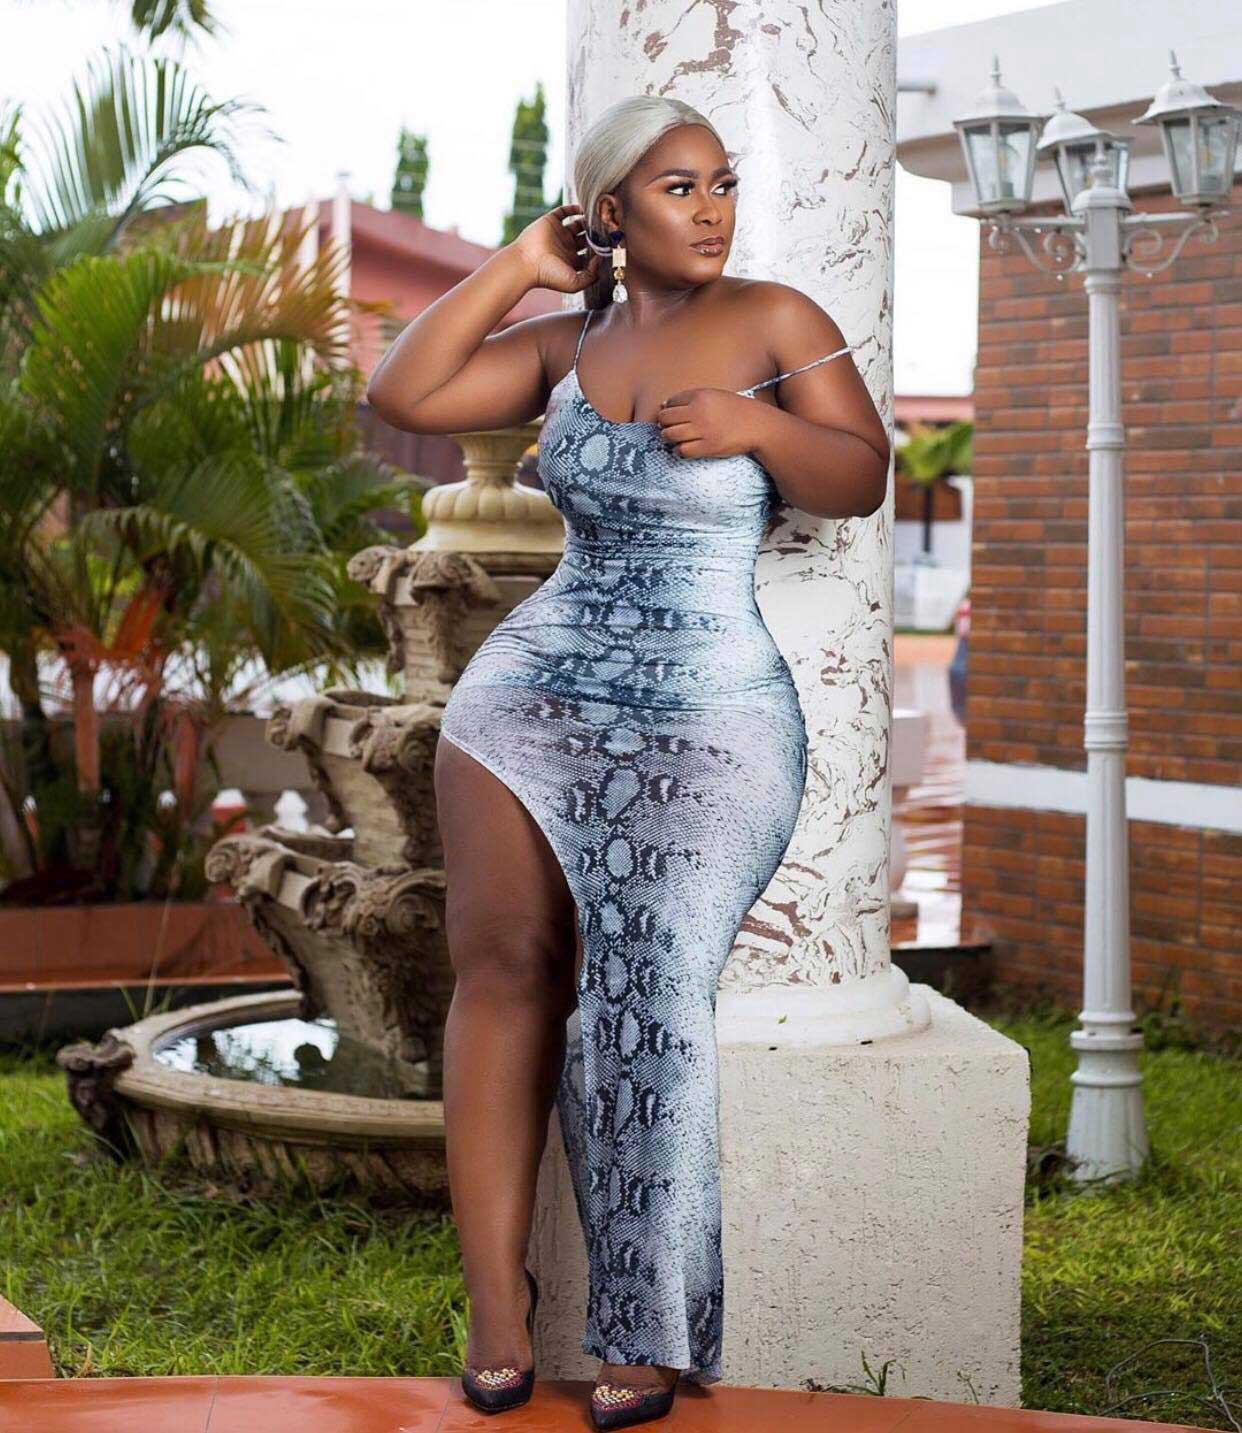 Abidivabroni, the curvaceous Ghanaian mother of 4